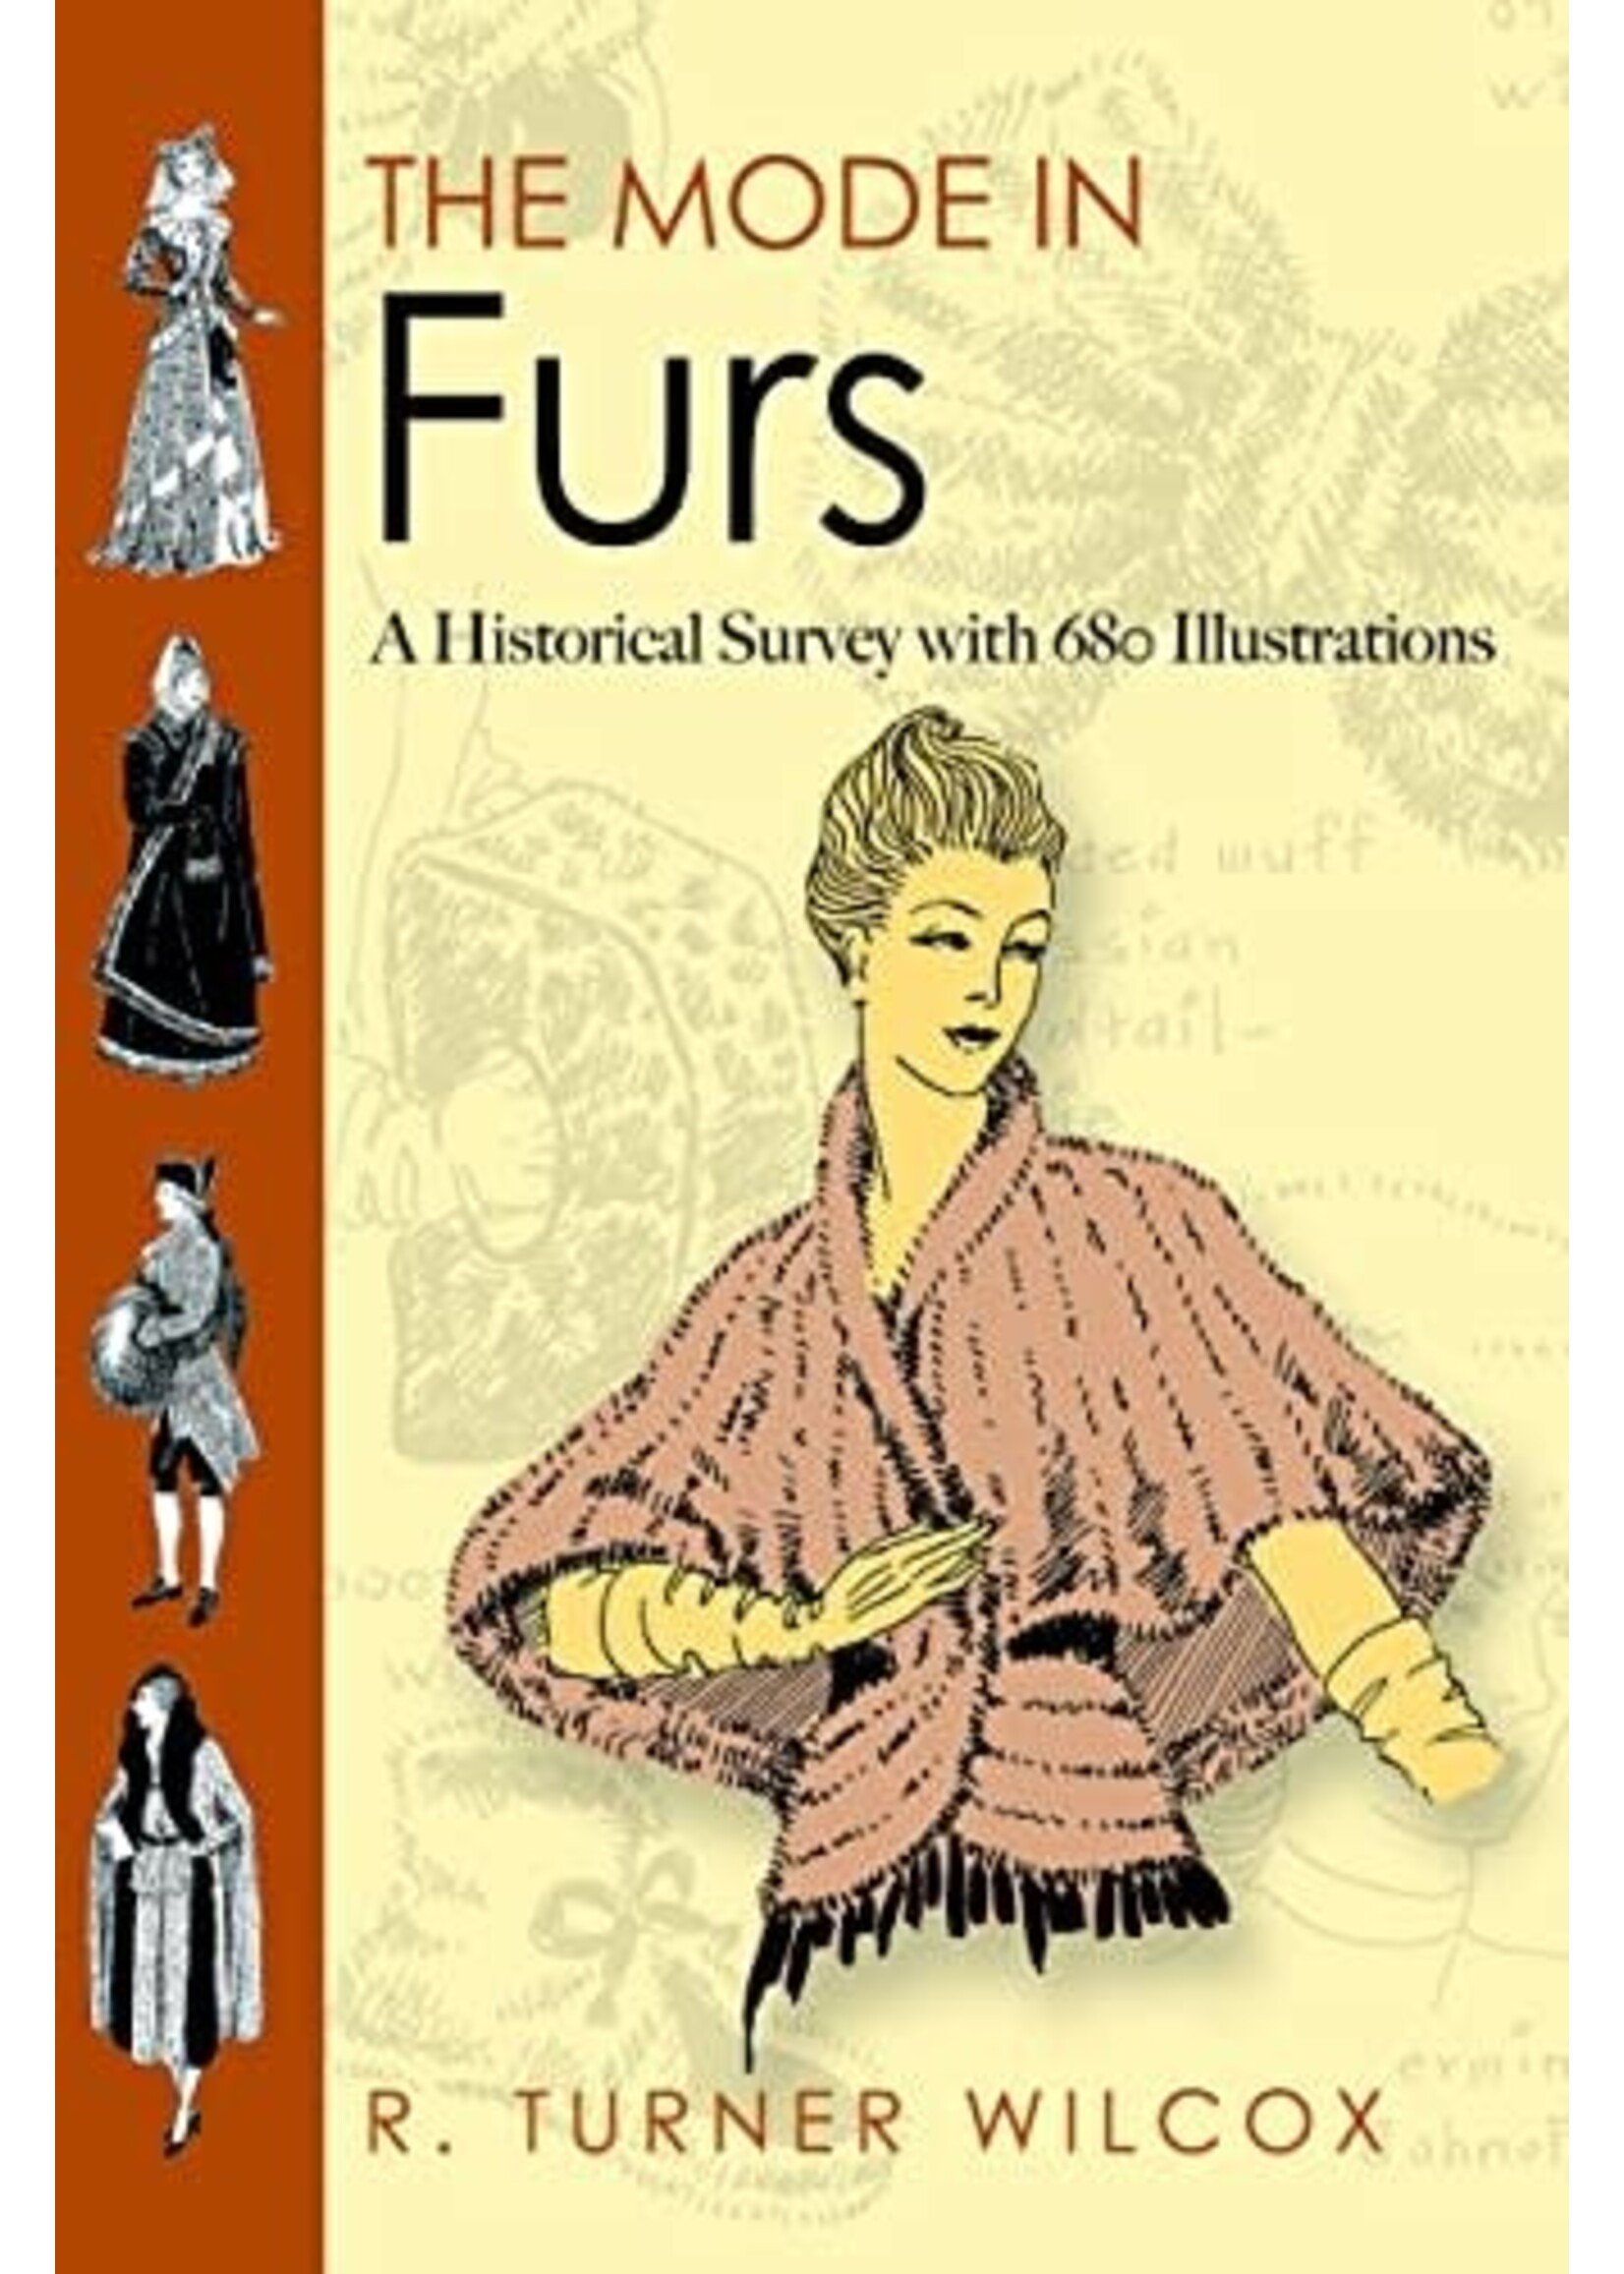 The Mode in Furs: A Historical Survey with 680 Illustrations